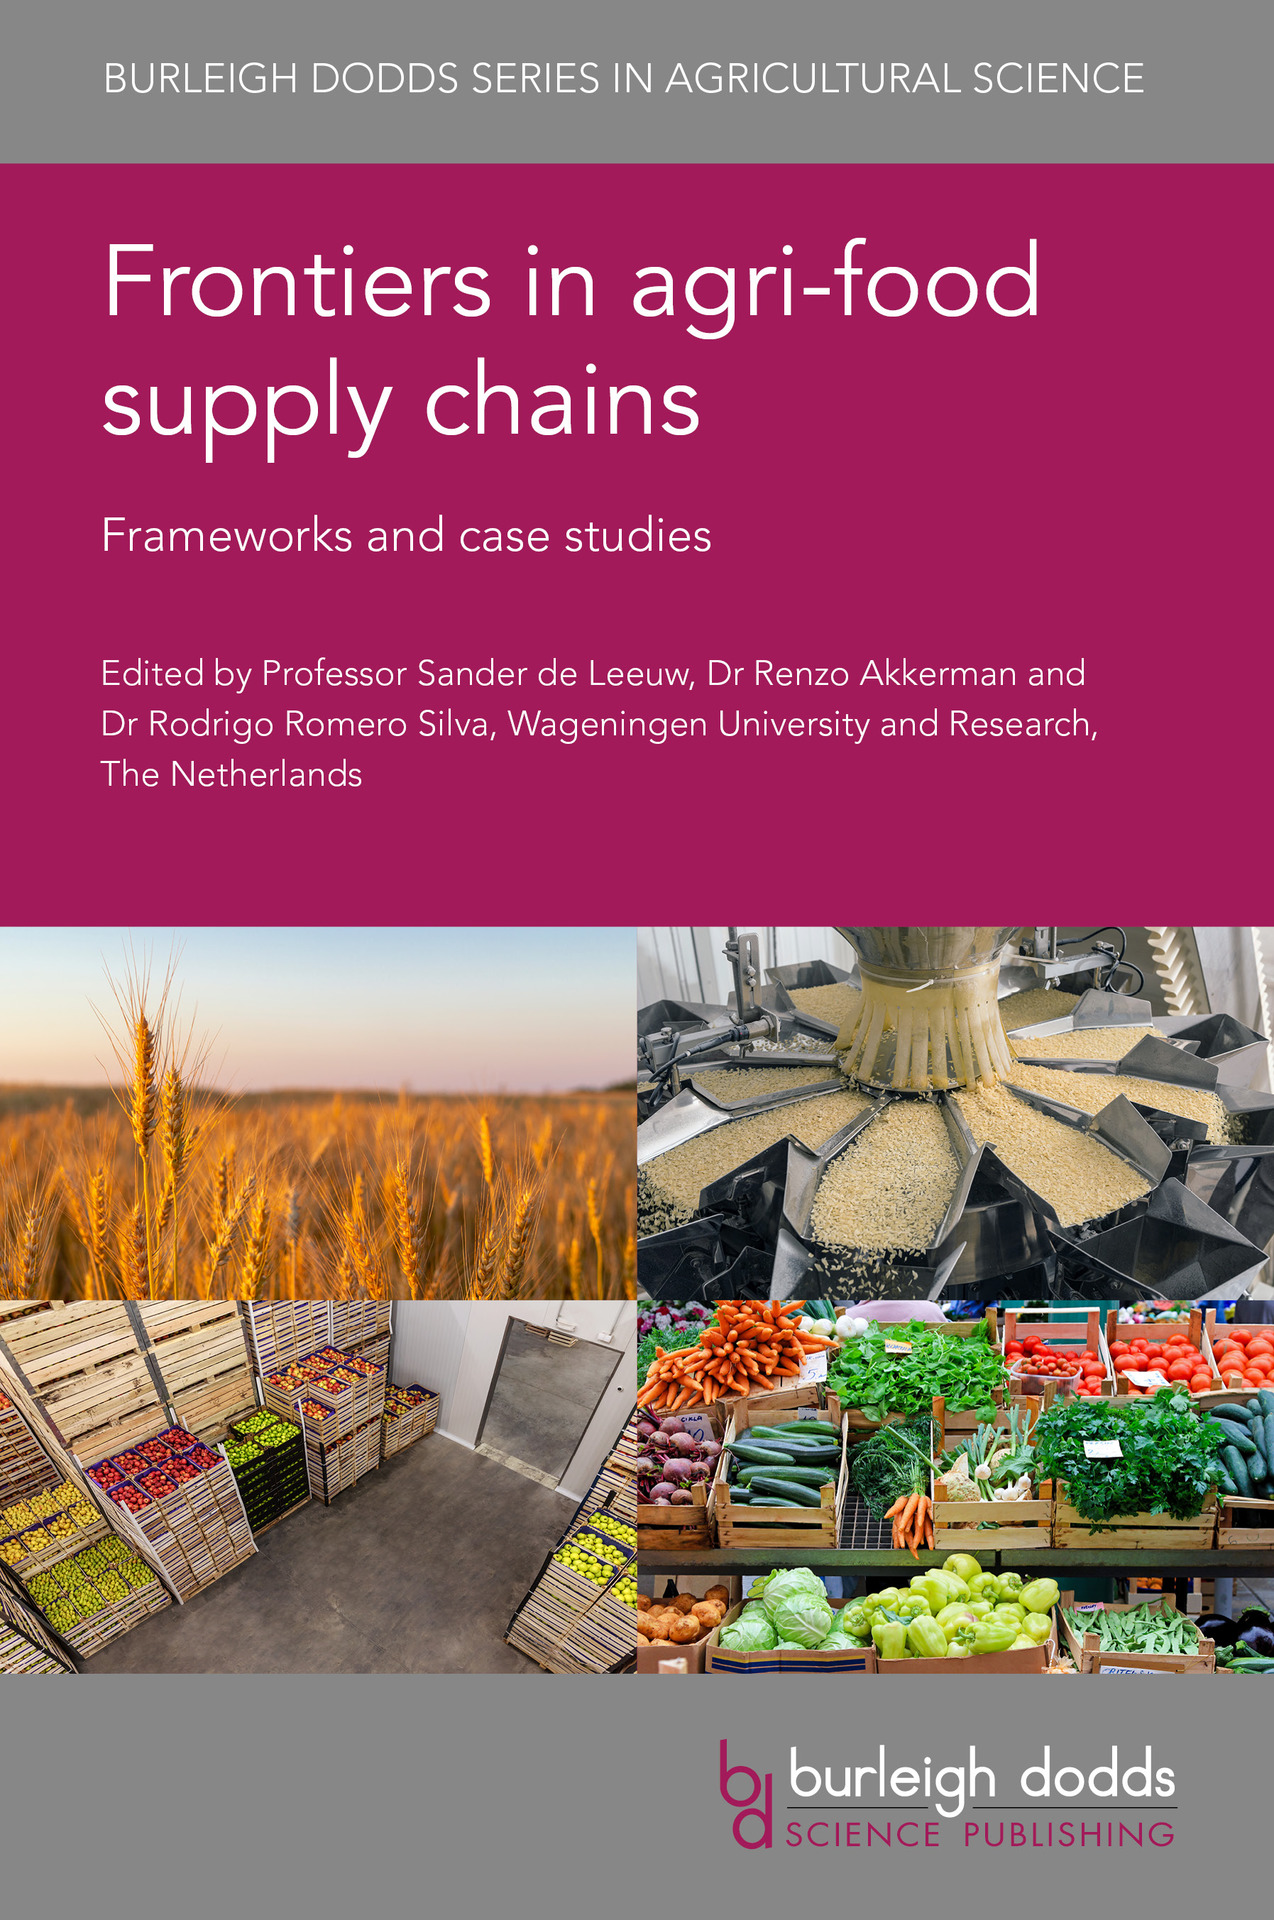 Frontiers in agri-food supply chains: Frameworks and case studies